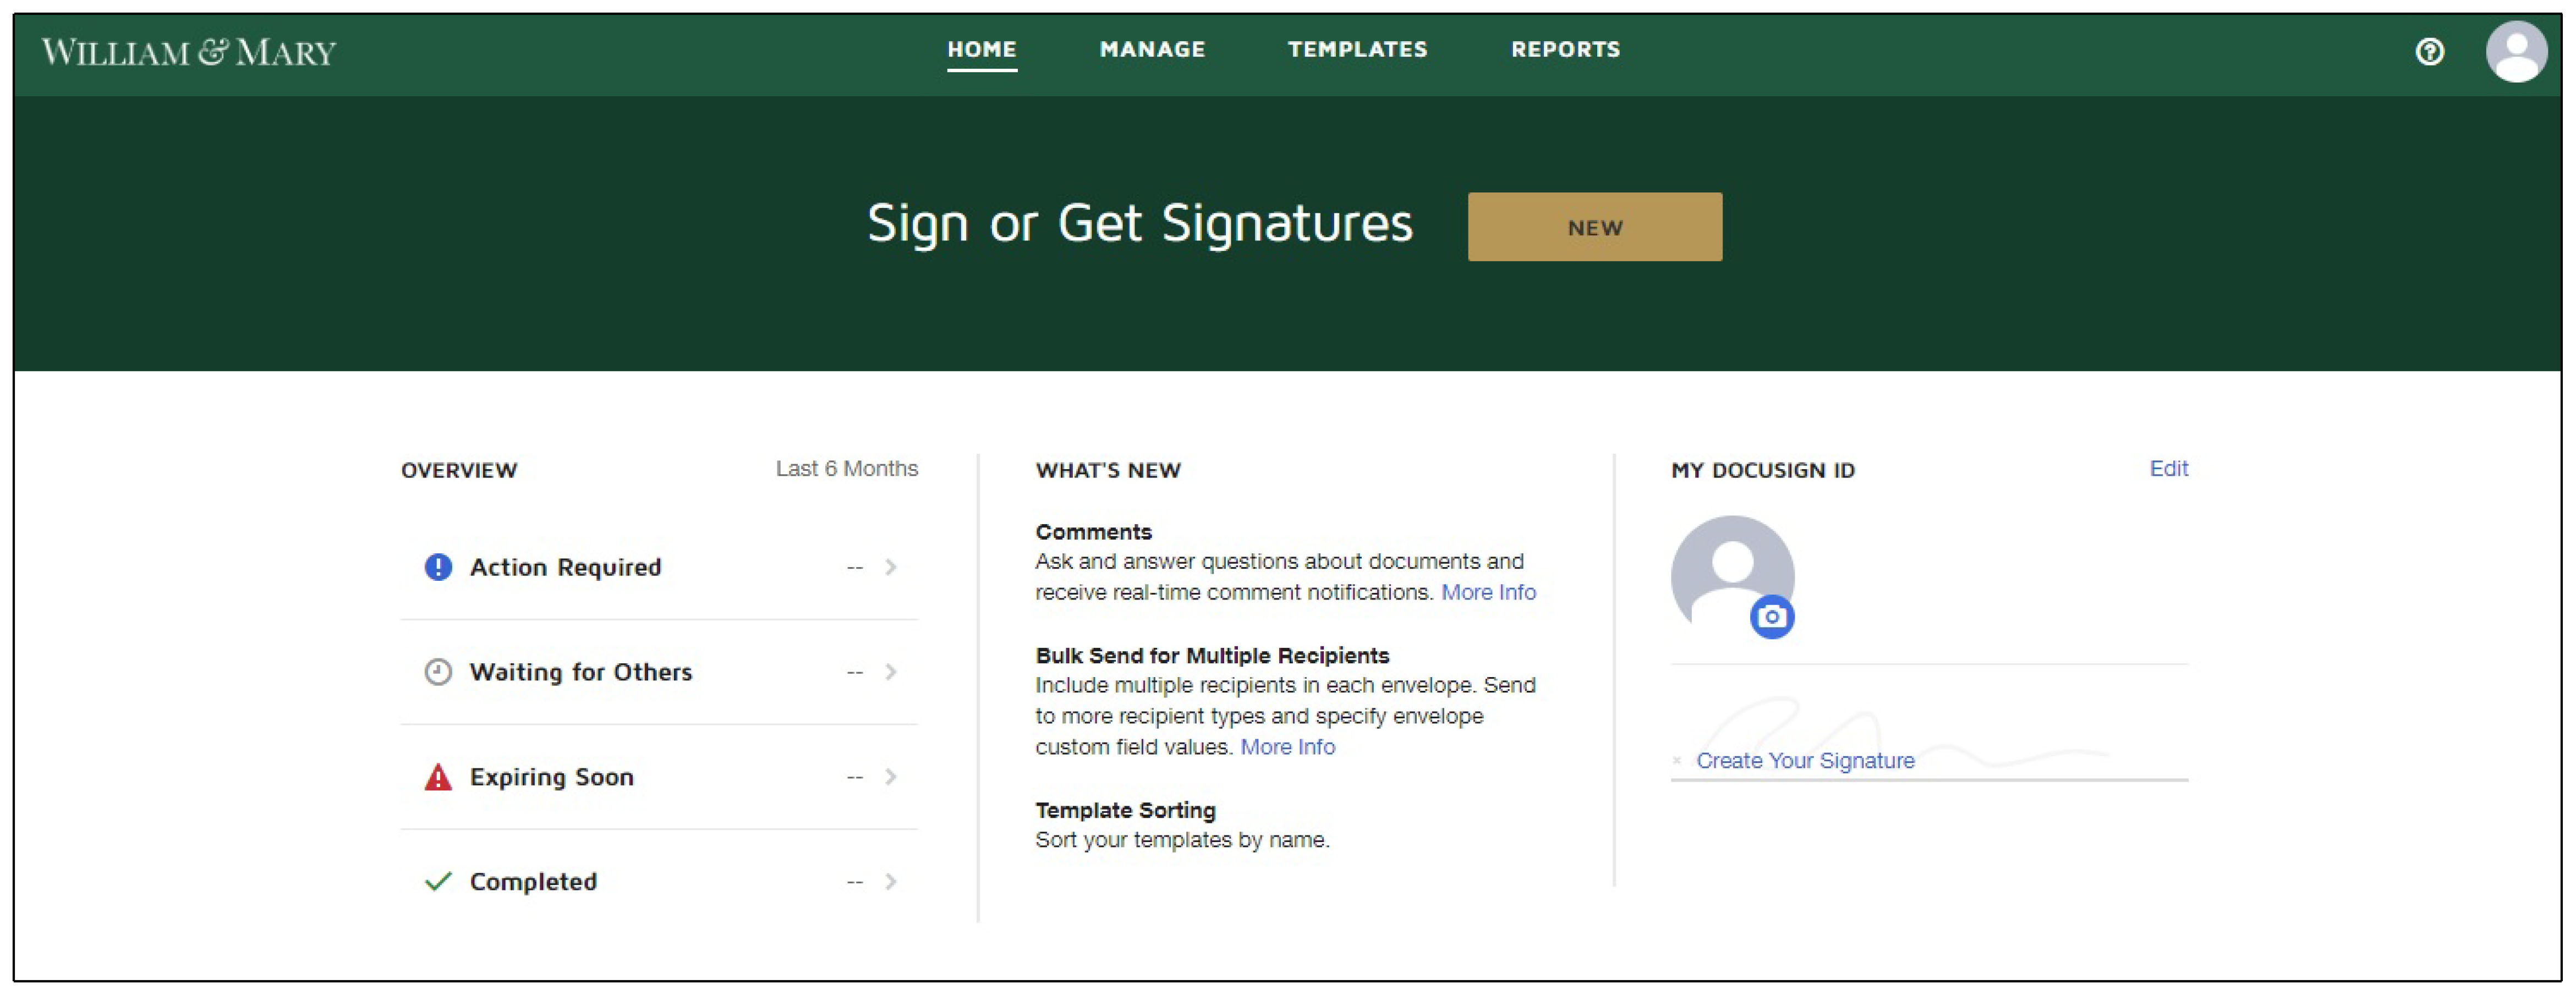 Screenshot of the W&amp;M DocuSign home page, with options to see what signatures are needed, make your own signature, and see what's new on DocuSign